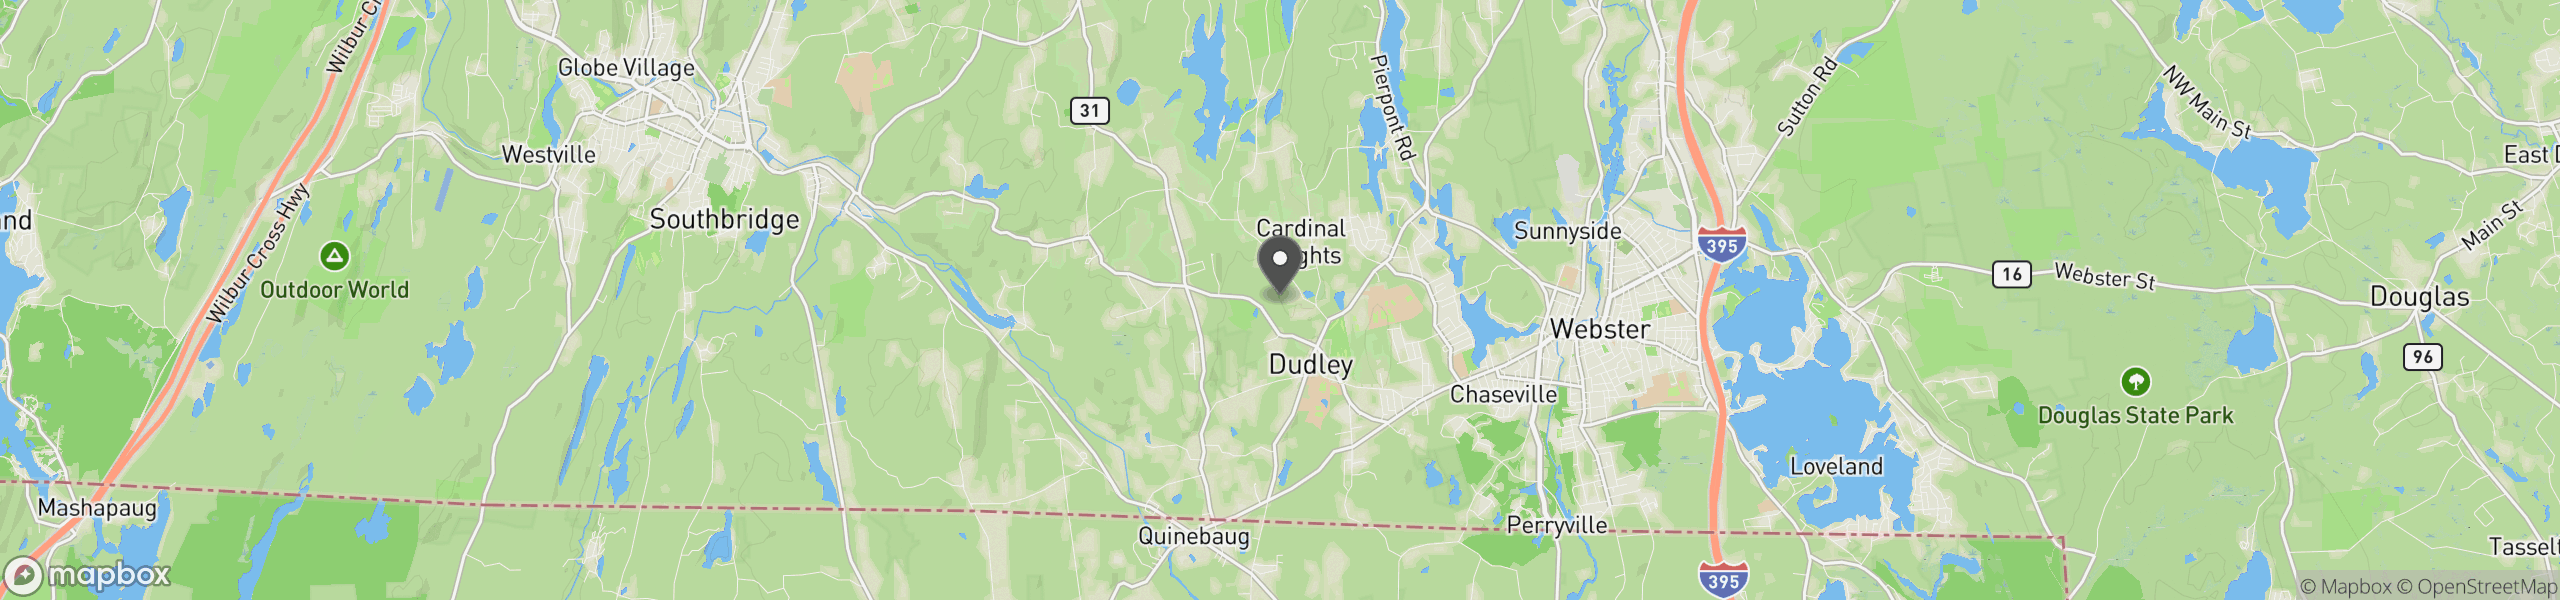 Dudley, MA 01571